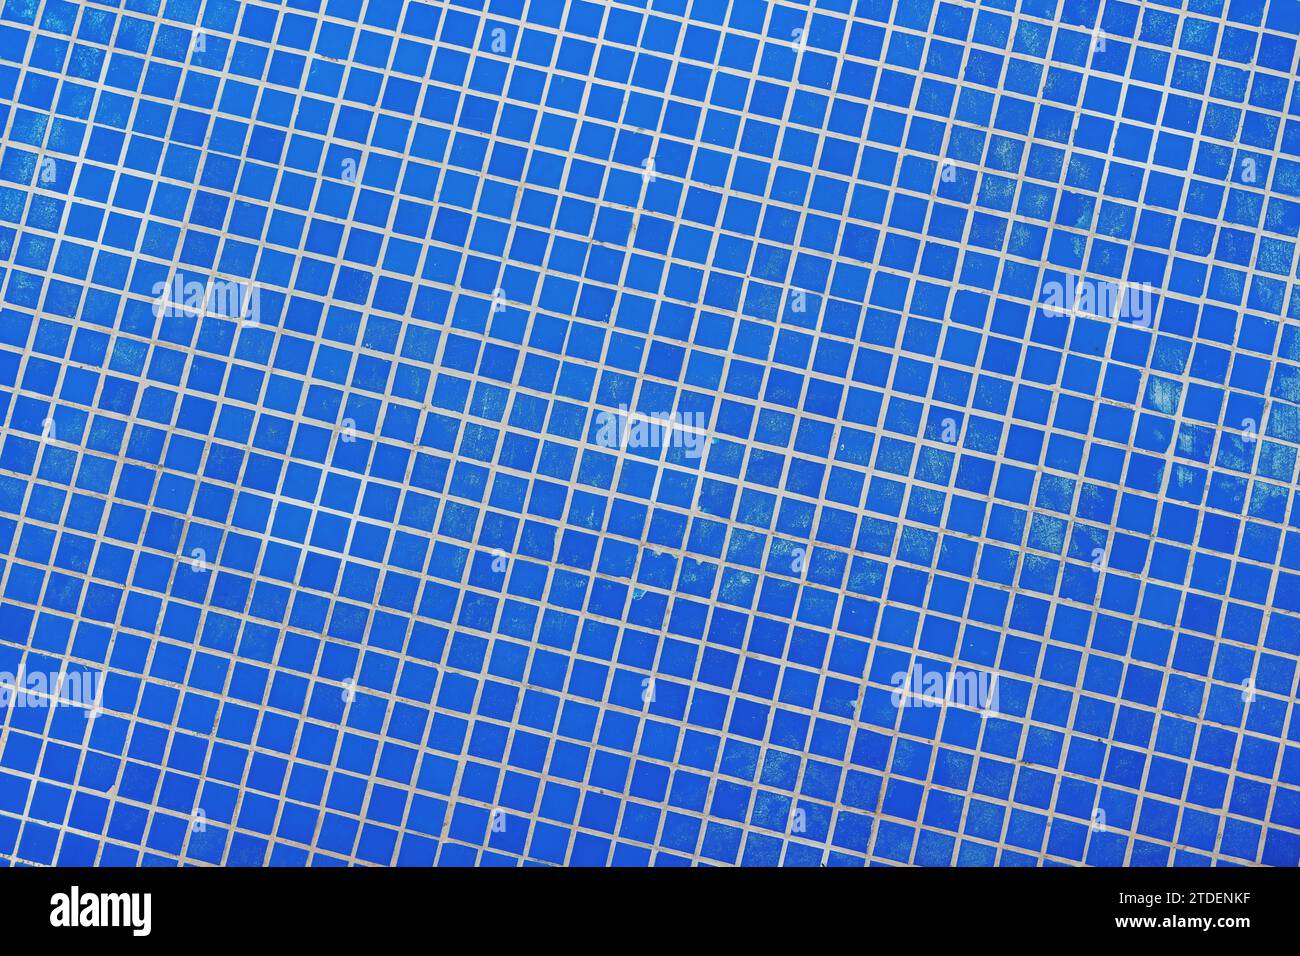 Small blue ceramic tiles in outdoor fountain pool as background and pattern Stock Photo